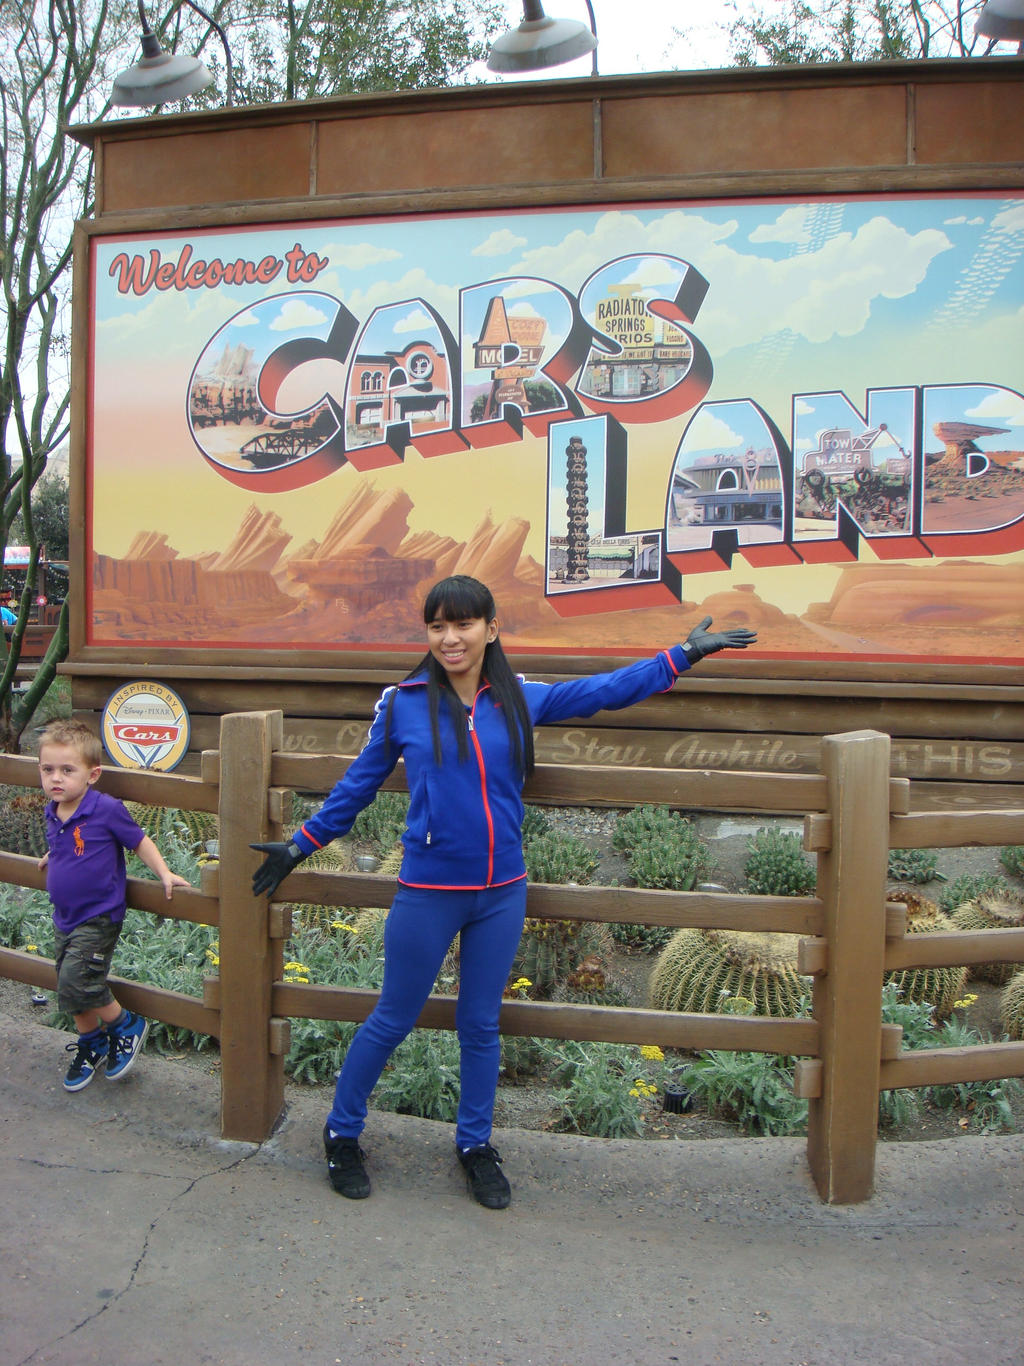 Welcome to Disney California Adventure's Cars Land